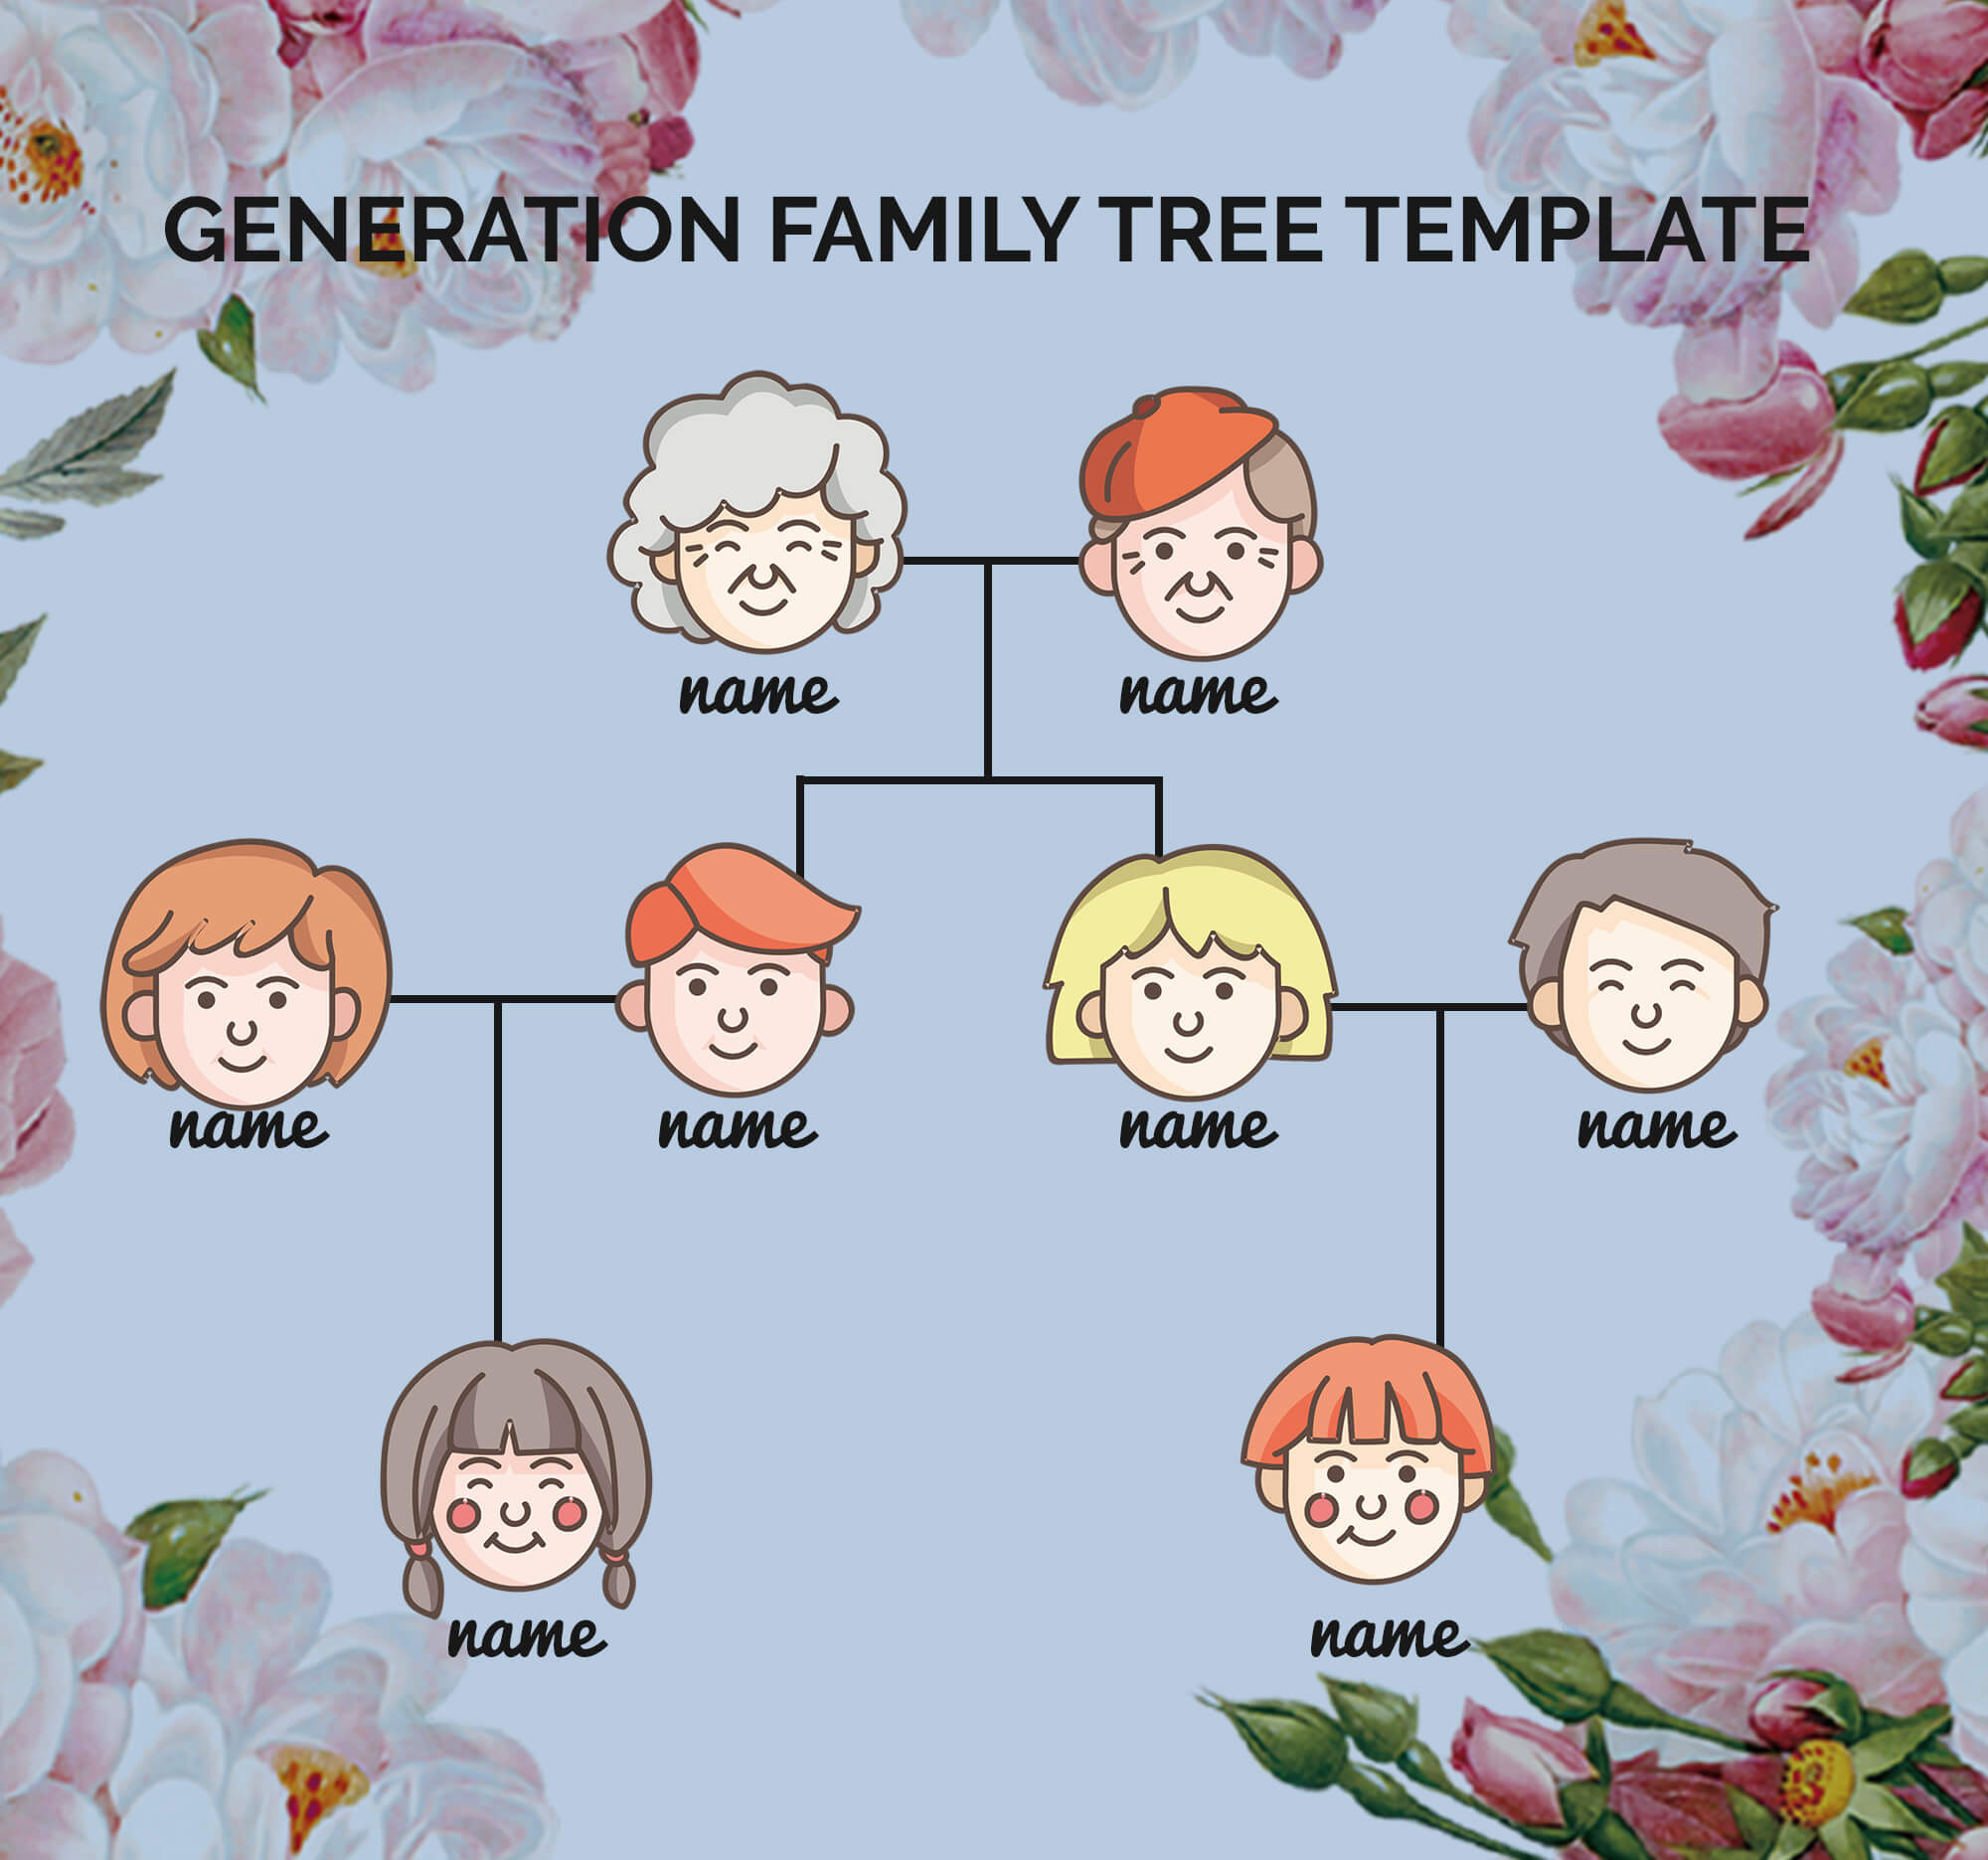 generation family tree template Free Templates in PSD file 1